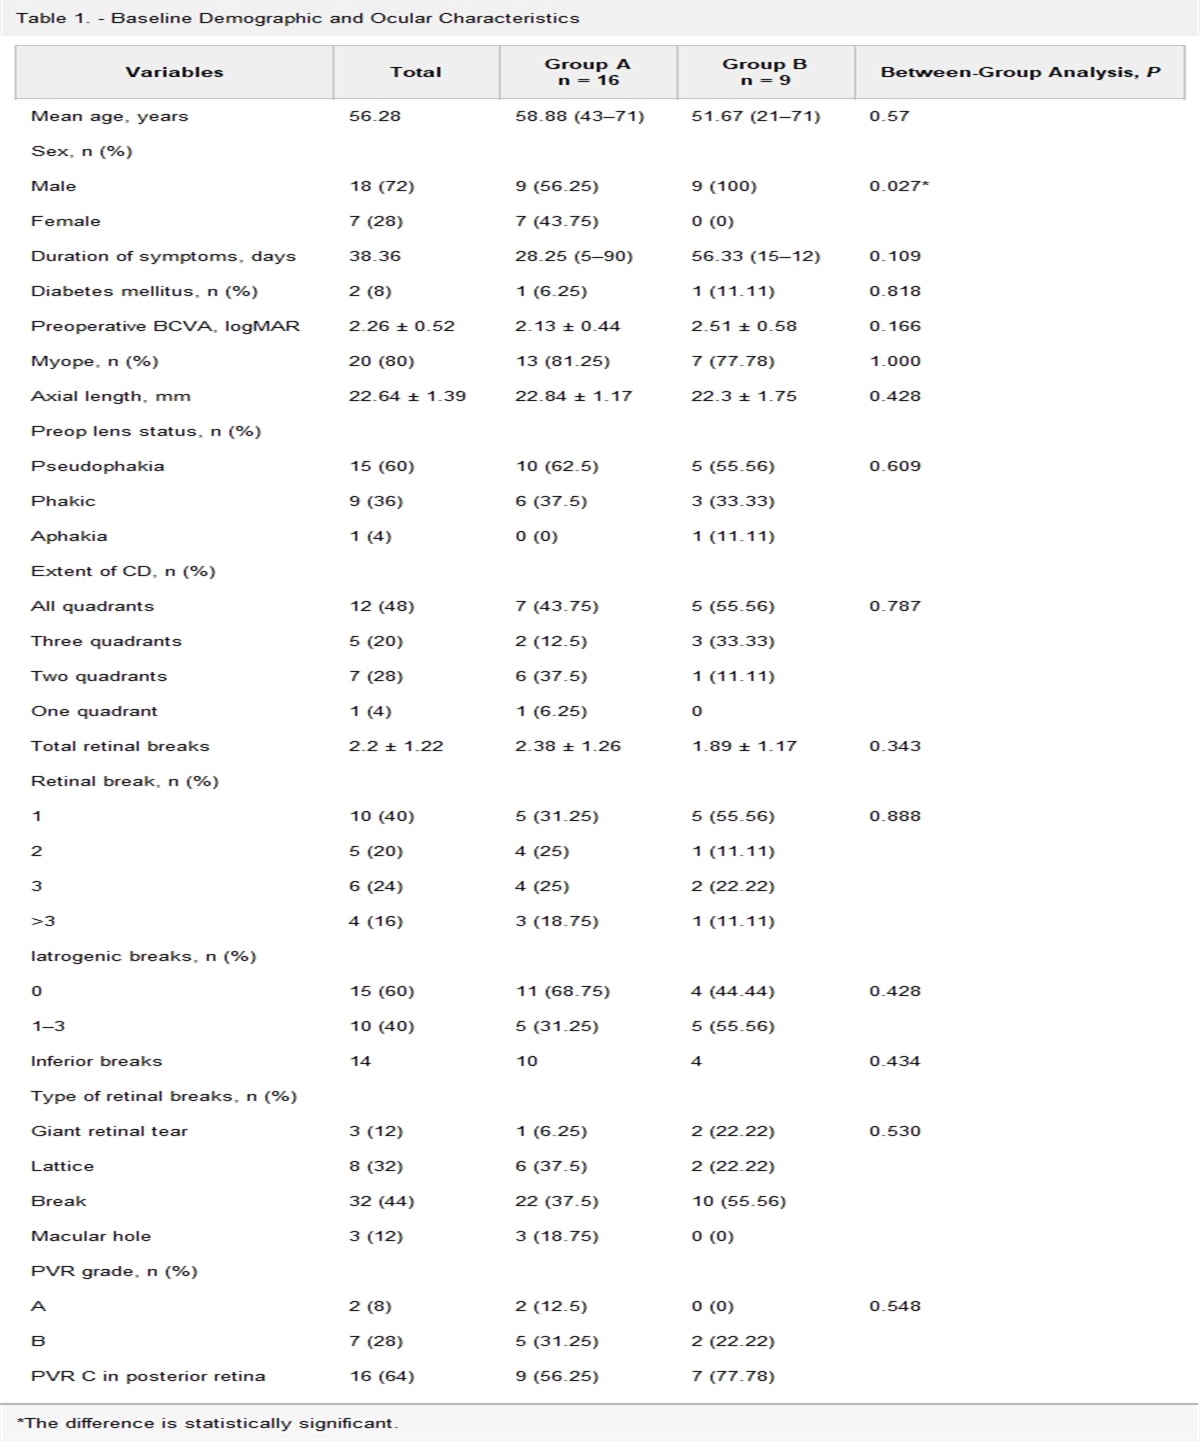 THE ROLE OF INTRAVITREAL METHOTREXATE AS AN ADJUNCT TO LOCAL OR SYSTEMIC CORTICOSTEROIDS IN VITRECTOMY FOR RHEGMATOGENOUS RETINAL DETACHMENT AND CHOROIDAL DETACHMENT: A Pilot Study